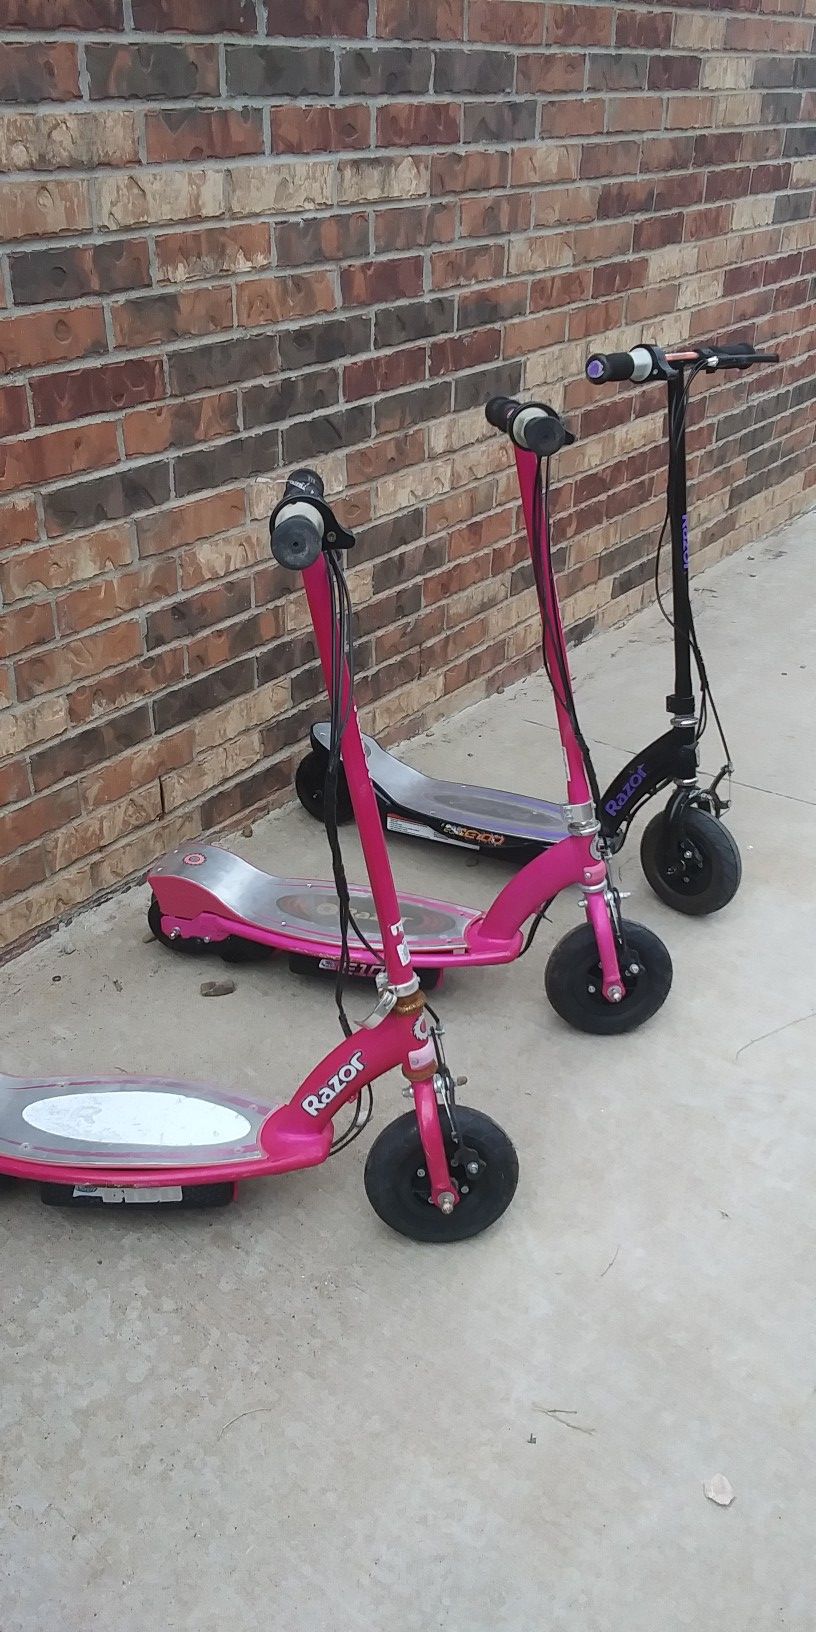 3 scooters need batteries and chargers